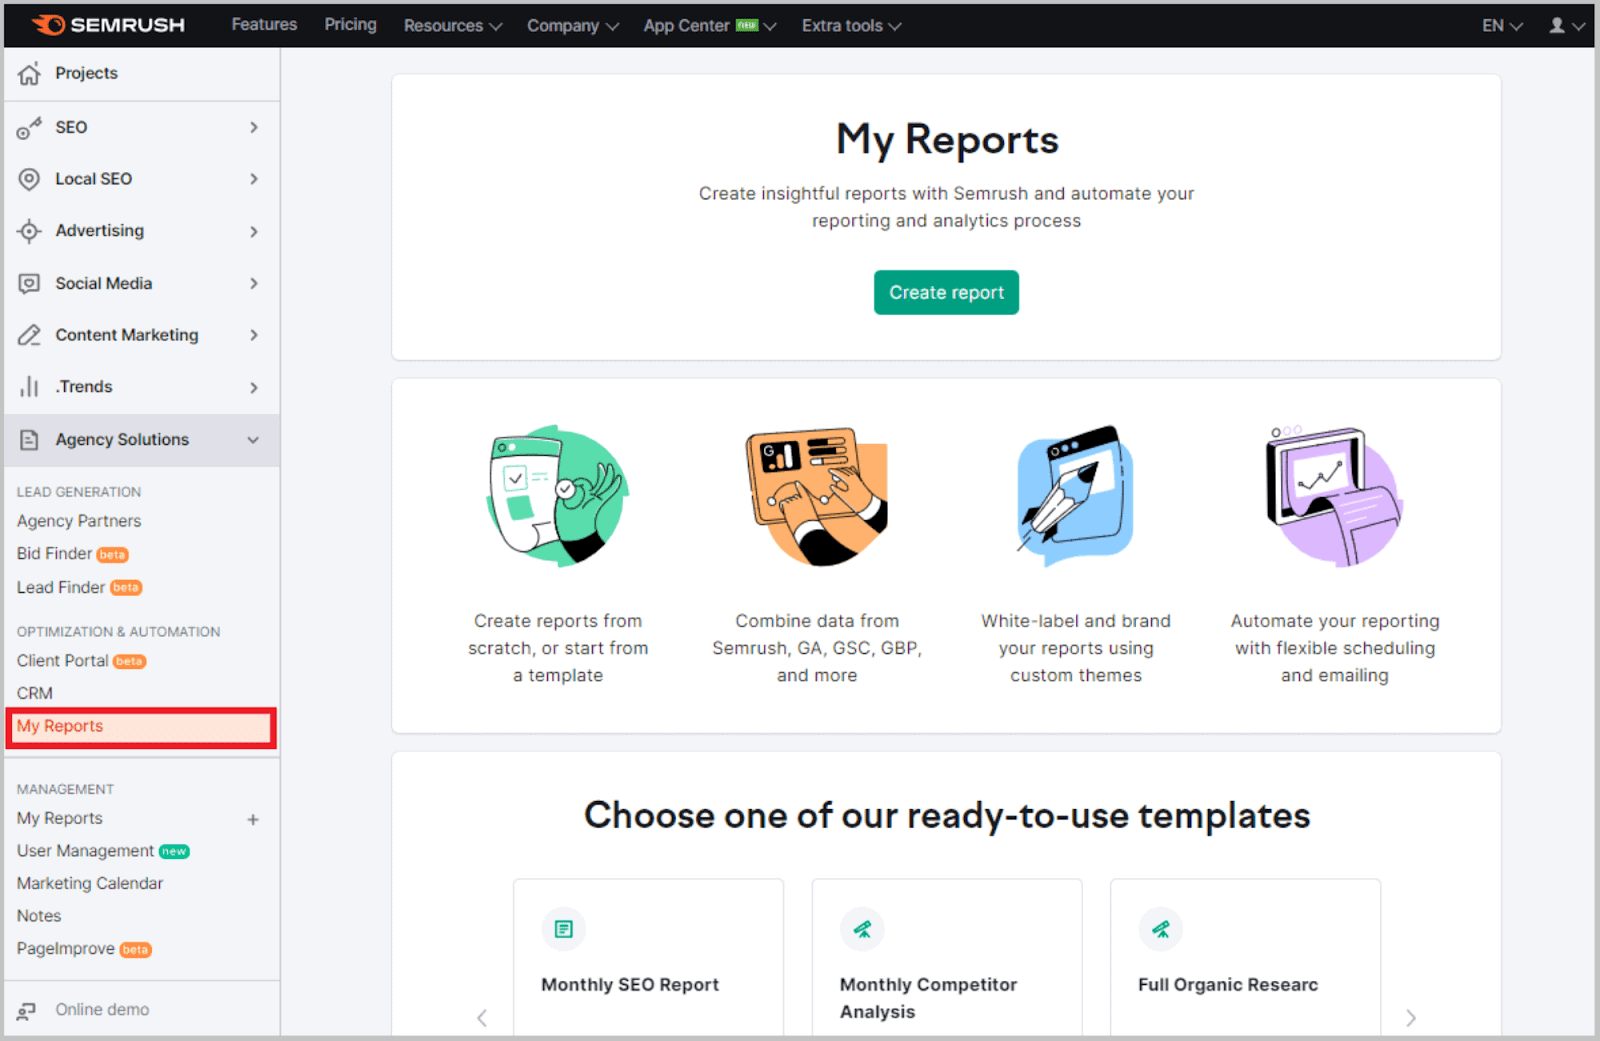 Generate status reports under My Reports section